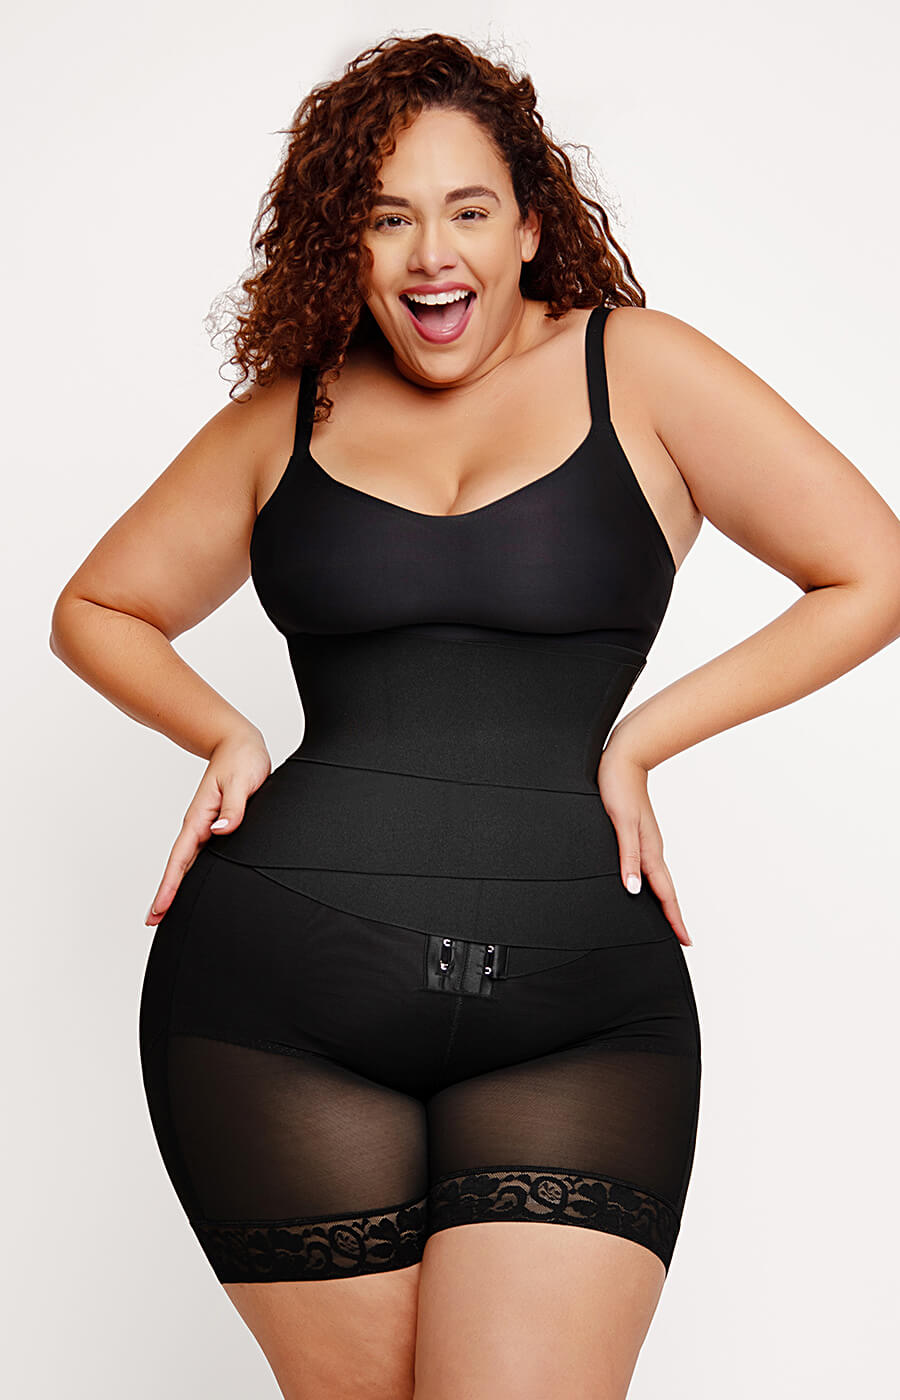 How to Boost Your Confidence with Shapellx Women’s Shapewear